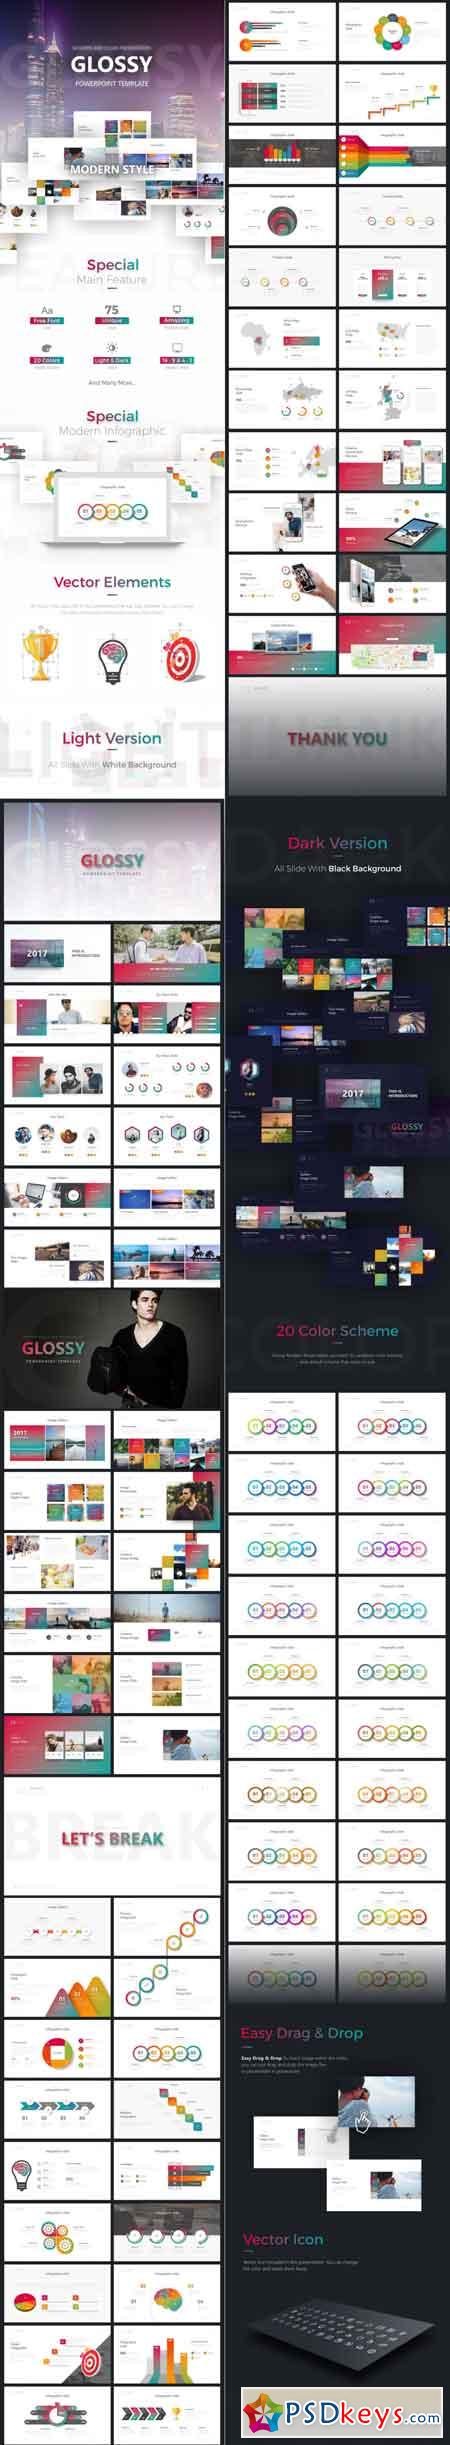 Glossy PowerPoint Template 19873464